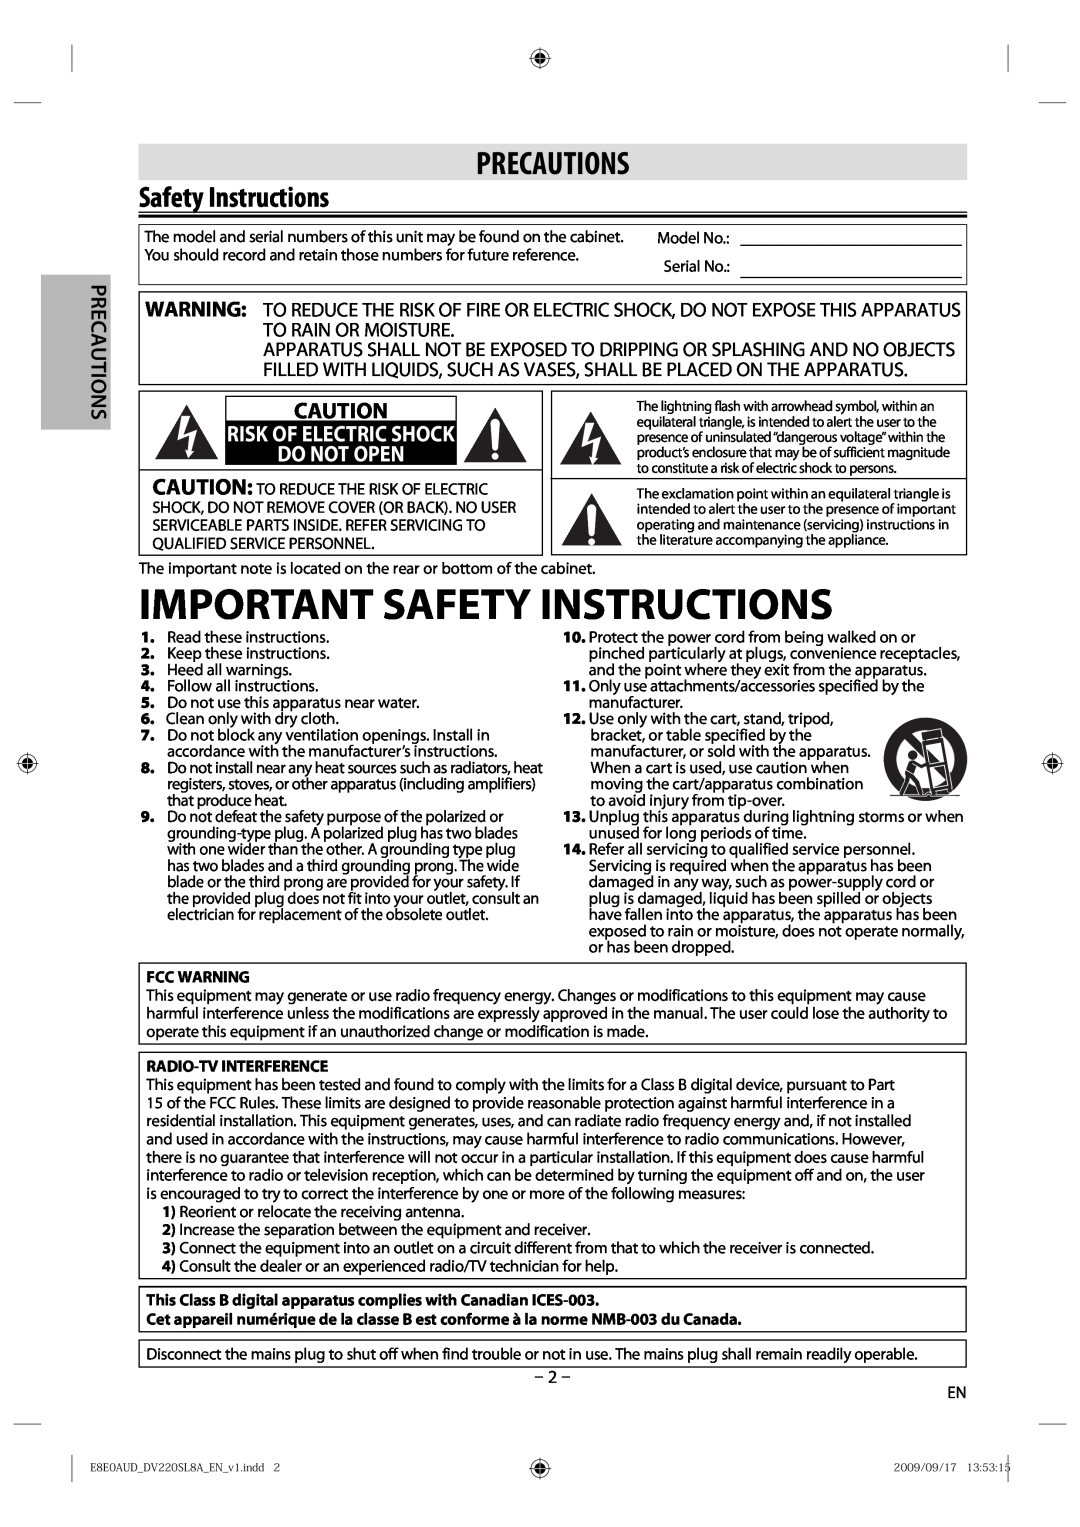 Sylvania DV220SL8 A Important Safety Instructions, Precautions, Risk Of Electric Shock, Fcc Warning, Radio-Tv Interference 